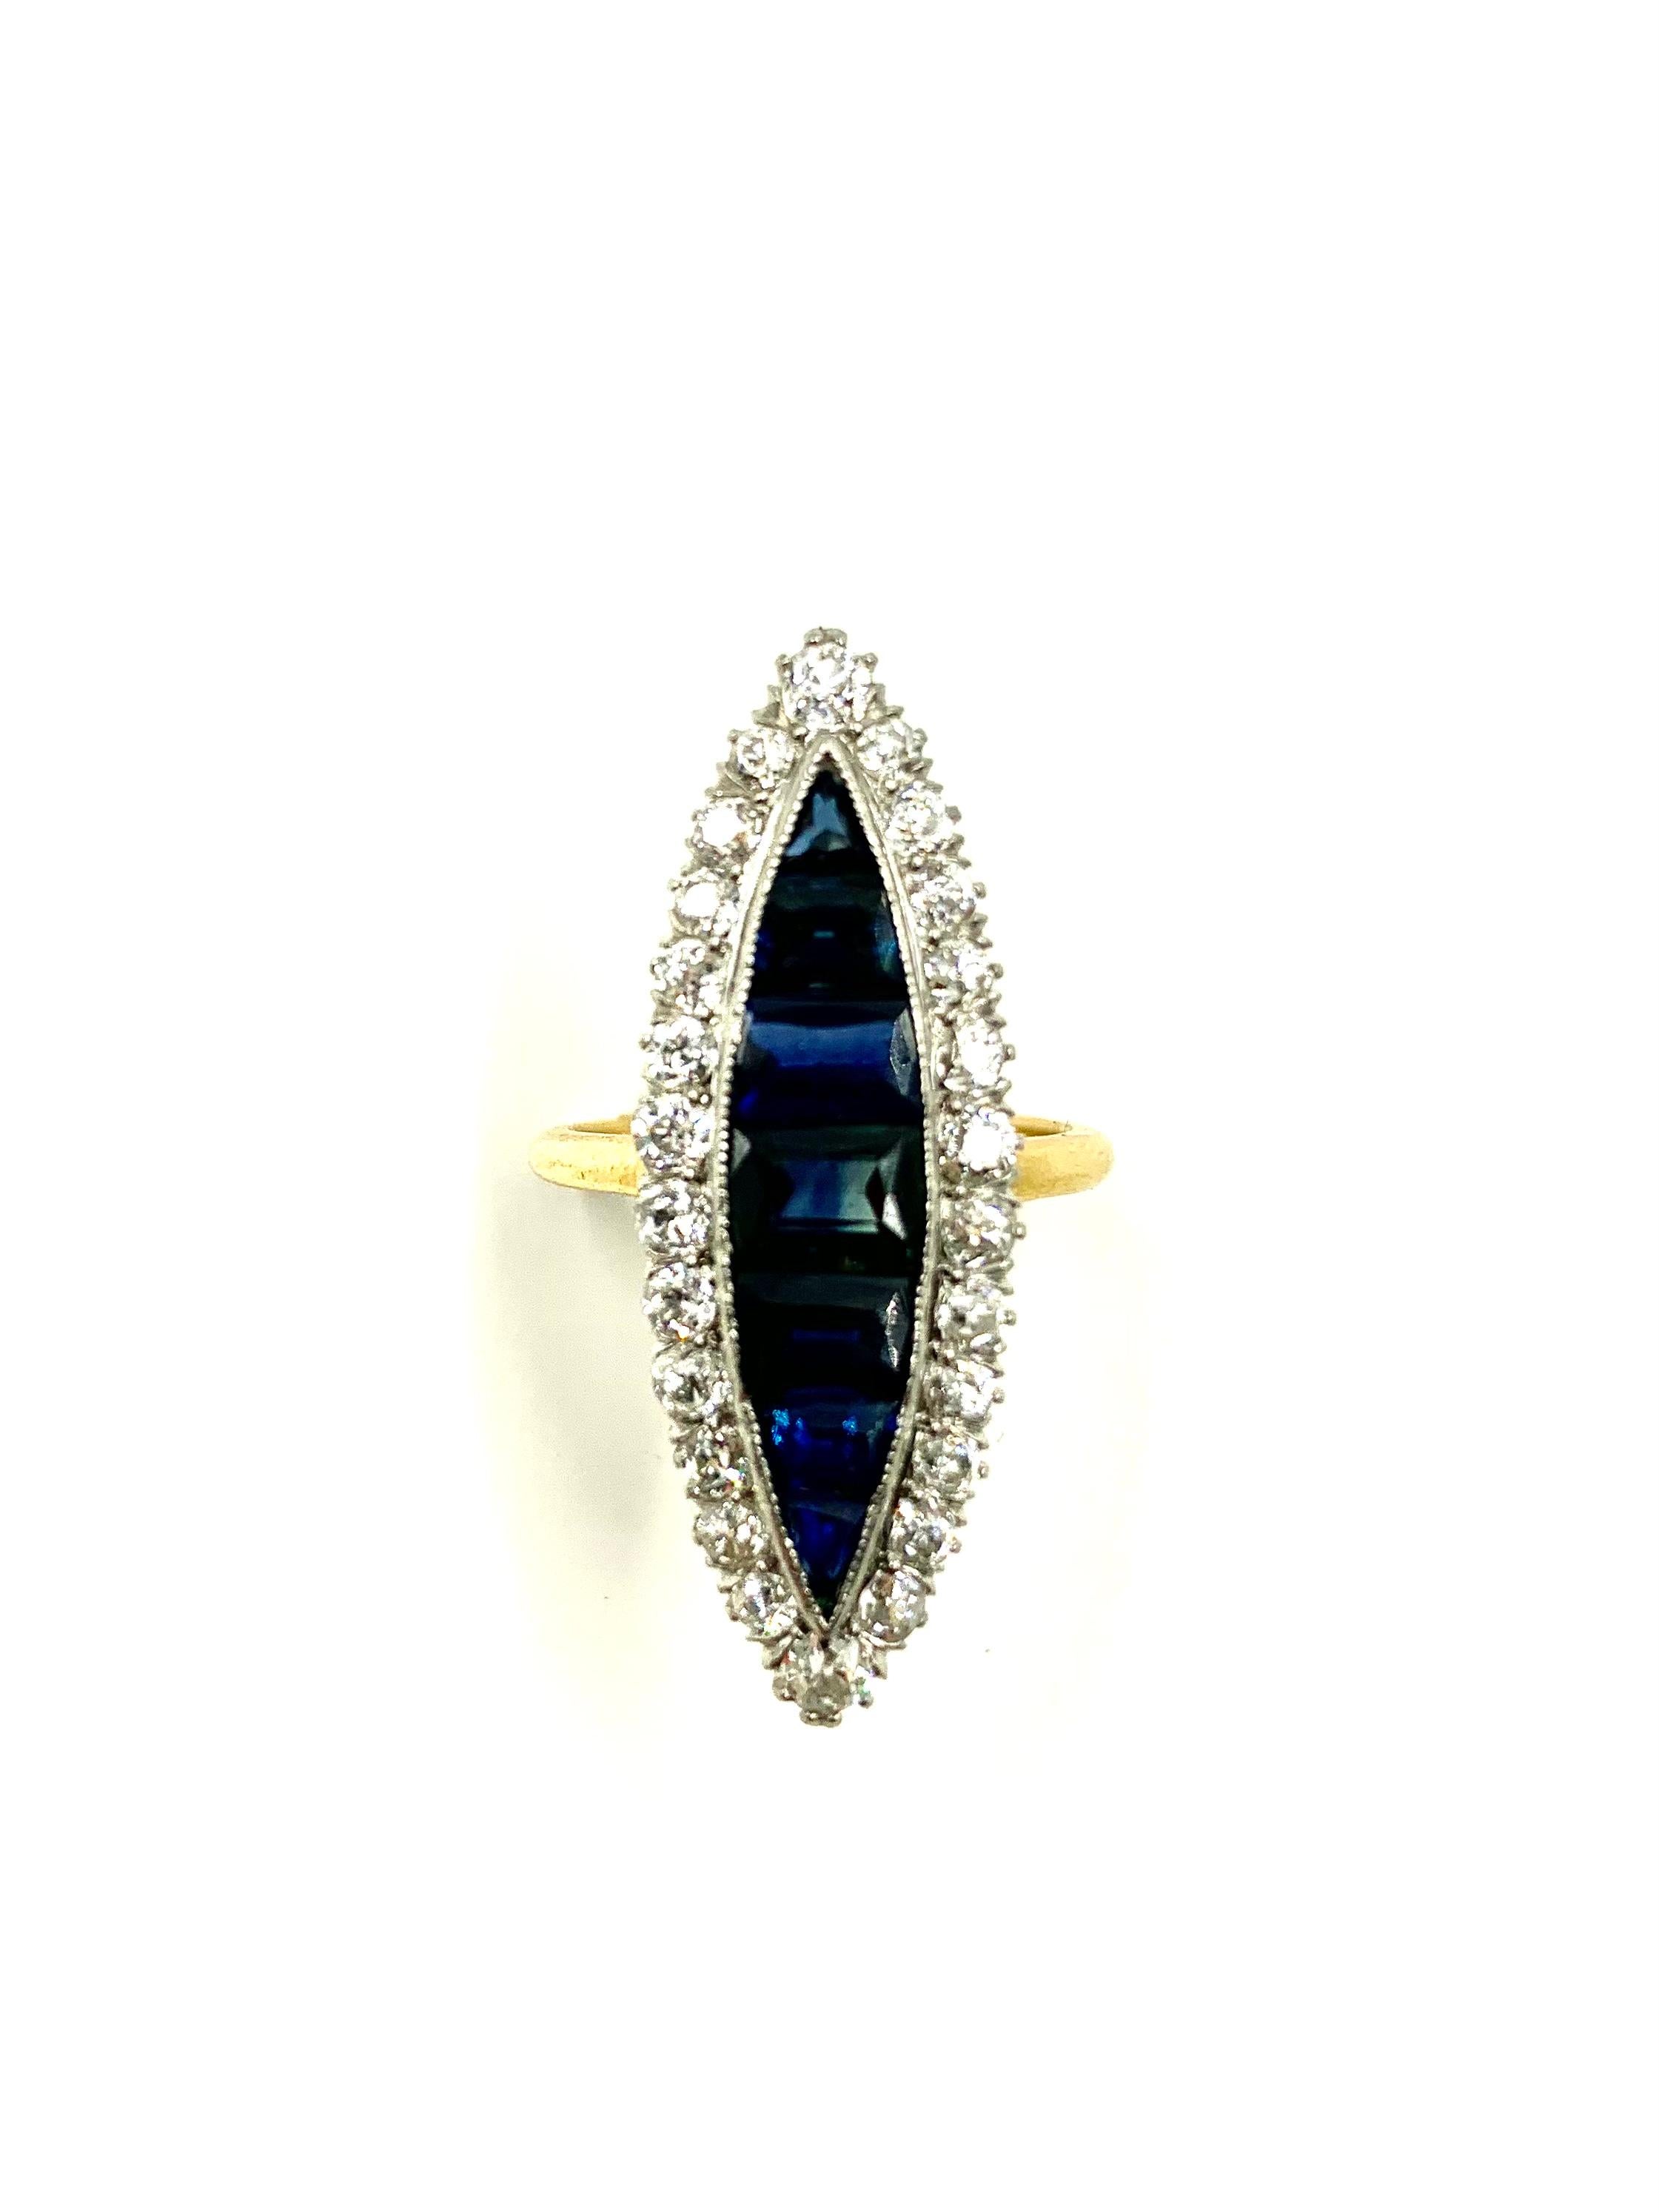 Large Antique Edwardian Diamond, Invisibly Set Sapphire 18k Gold Navette Ring For Sale 11